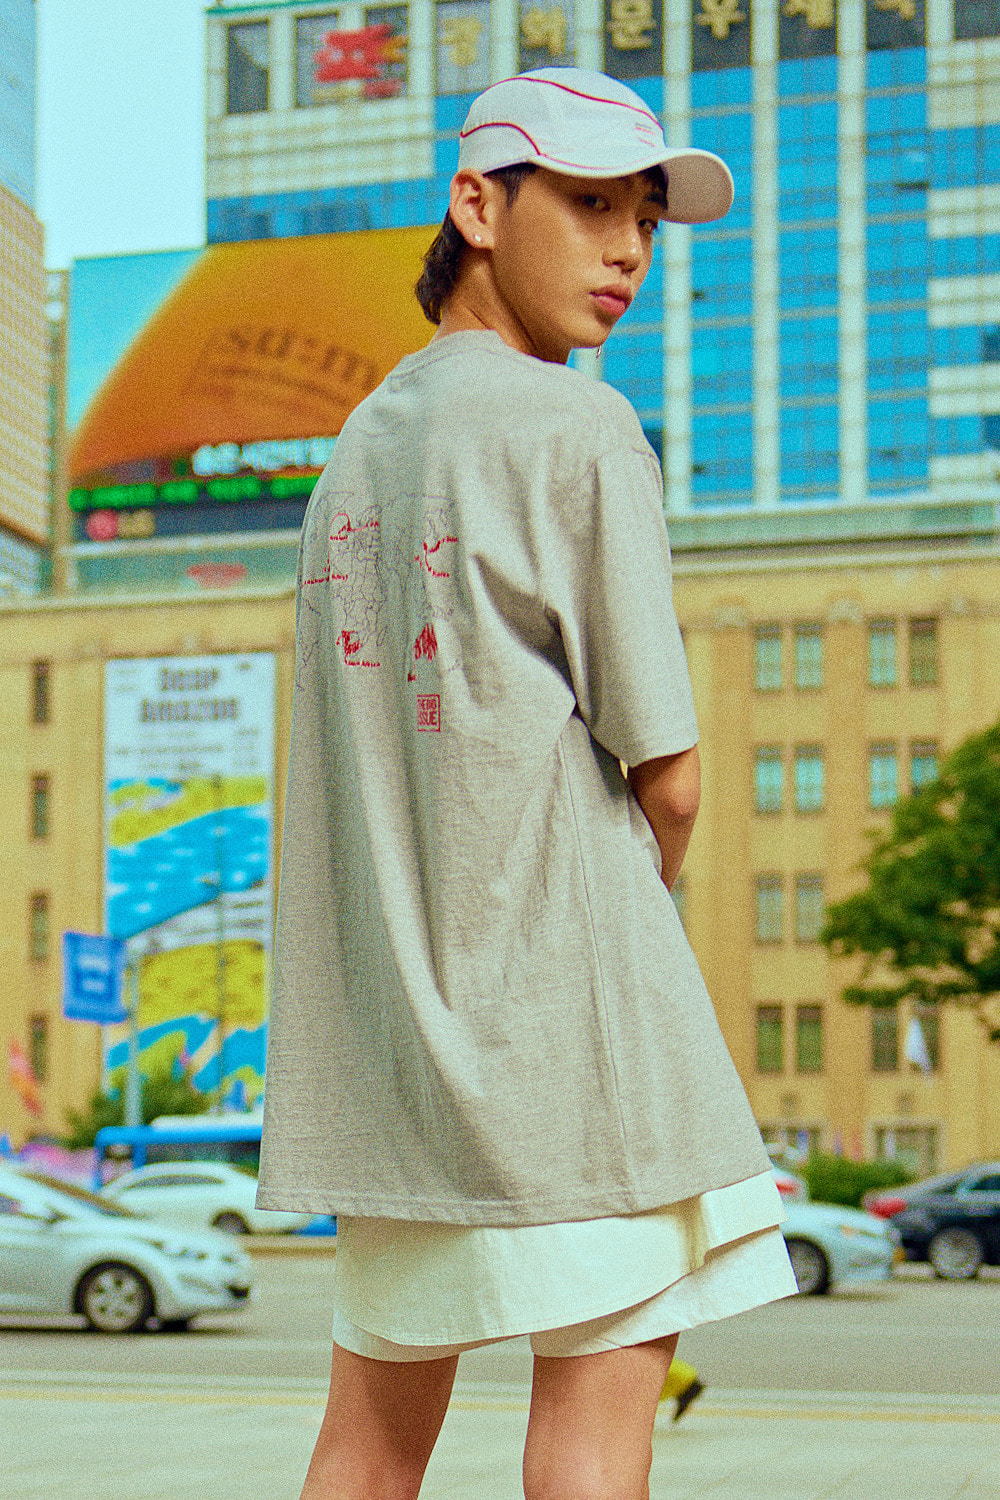 SWBD X BIG ISSUE MAP T-SHIRT (GRAY)